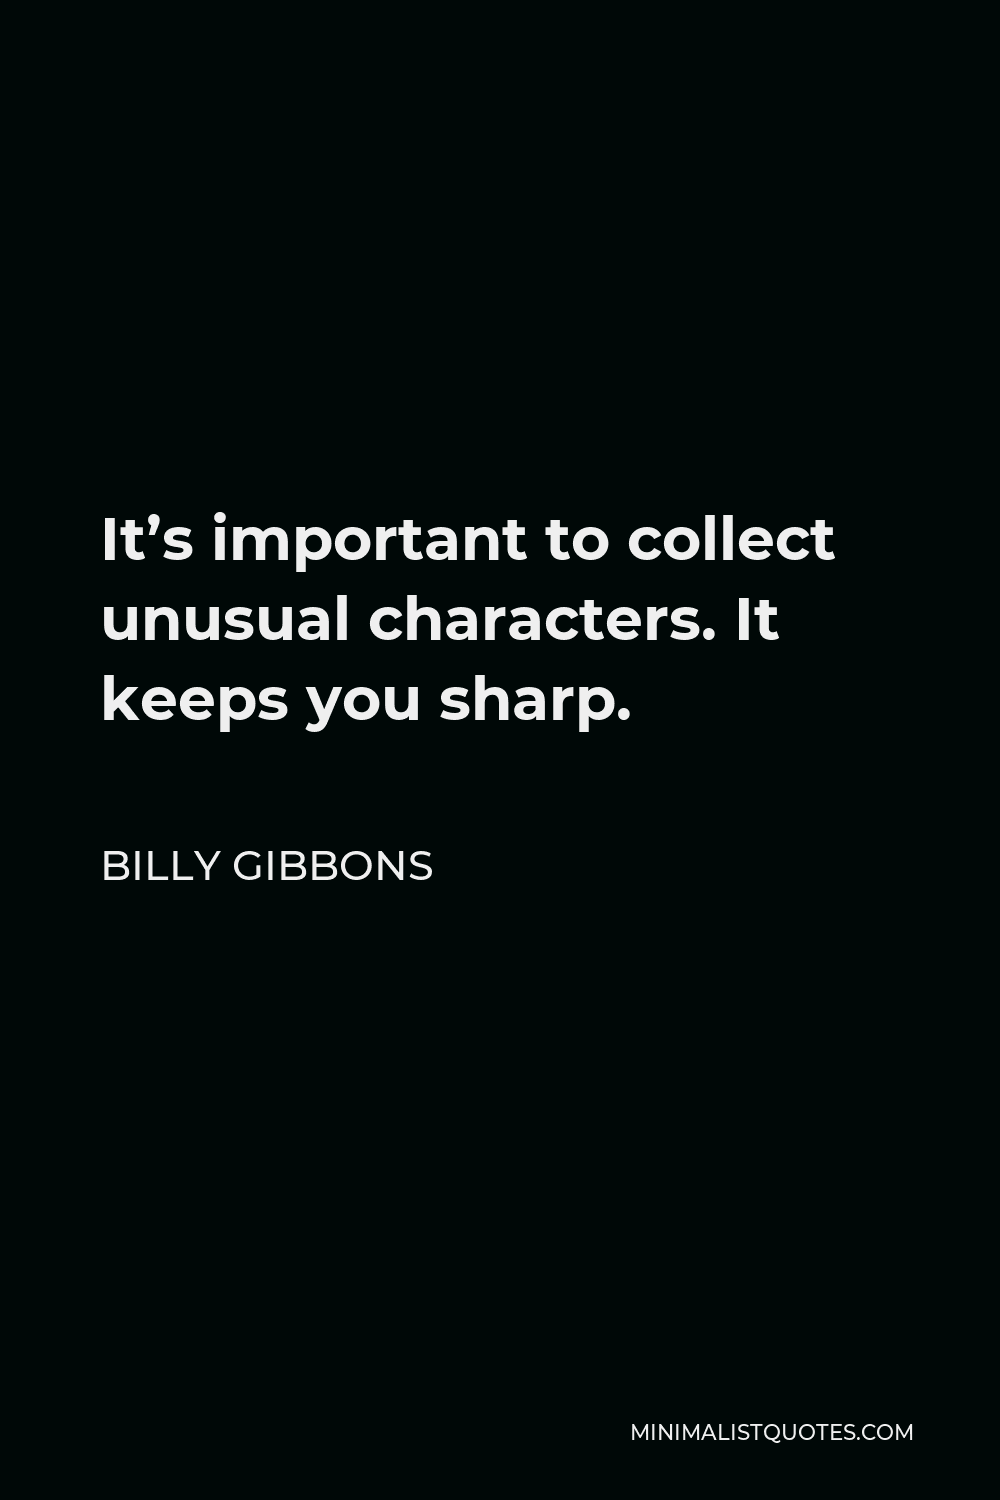 Billy Gibbons Quote - It’s important to collect unusual characters. It keeps you sharp.